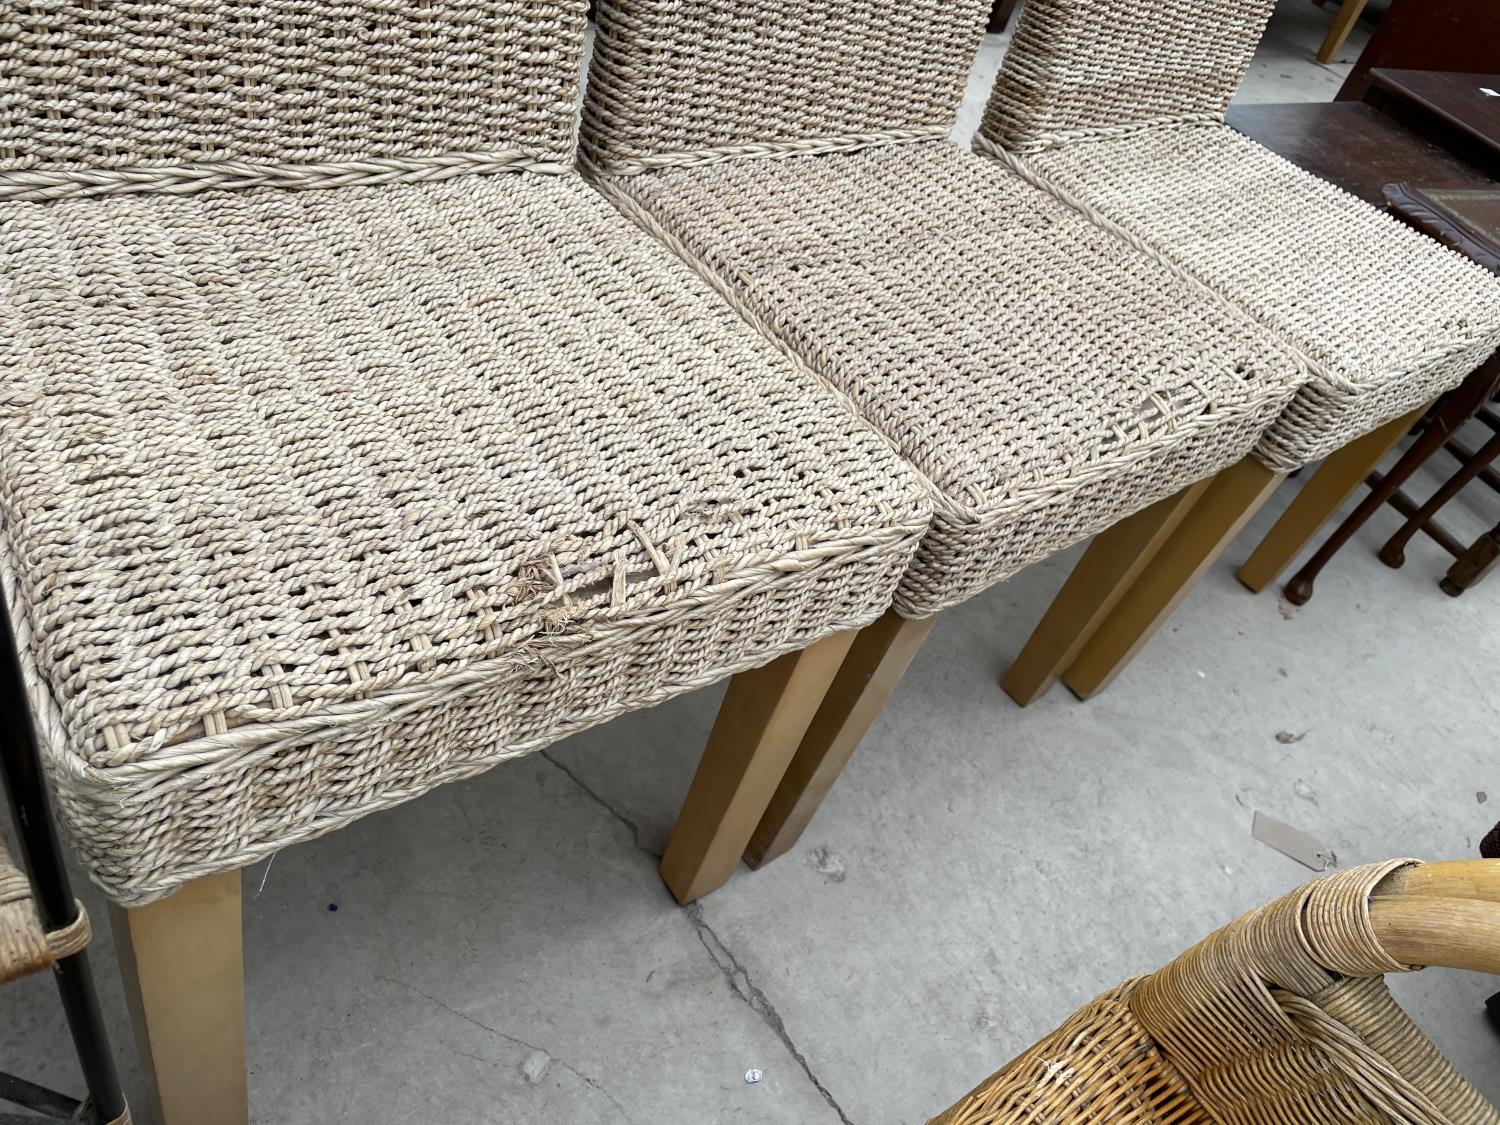 A PAIR OF STYLISH METALWARE FRAMED CONSERVATORY ELBOW CHAIRS WITH WICKER SEATS AND BACKS, TOGETHER - Image 6 of 6